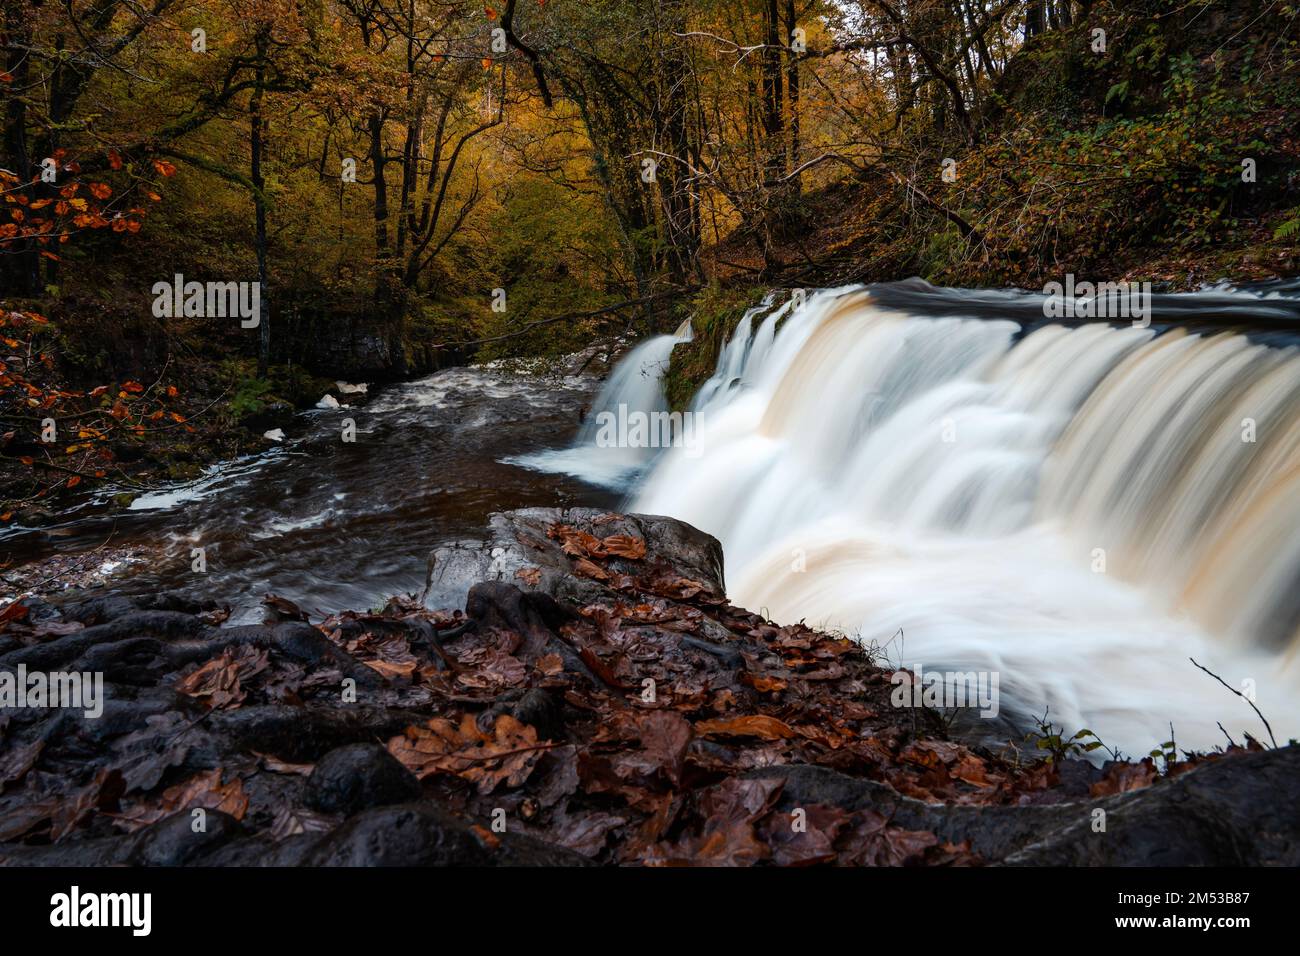 Four Waterfalls walk, Waterfall Country, Brecon Beacons national park, South Wales, the United Kingdom. Long exposure stream in Autumn forest. Stock Photo